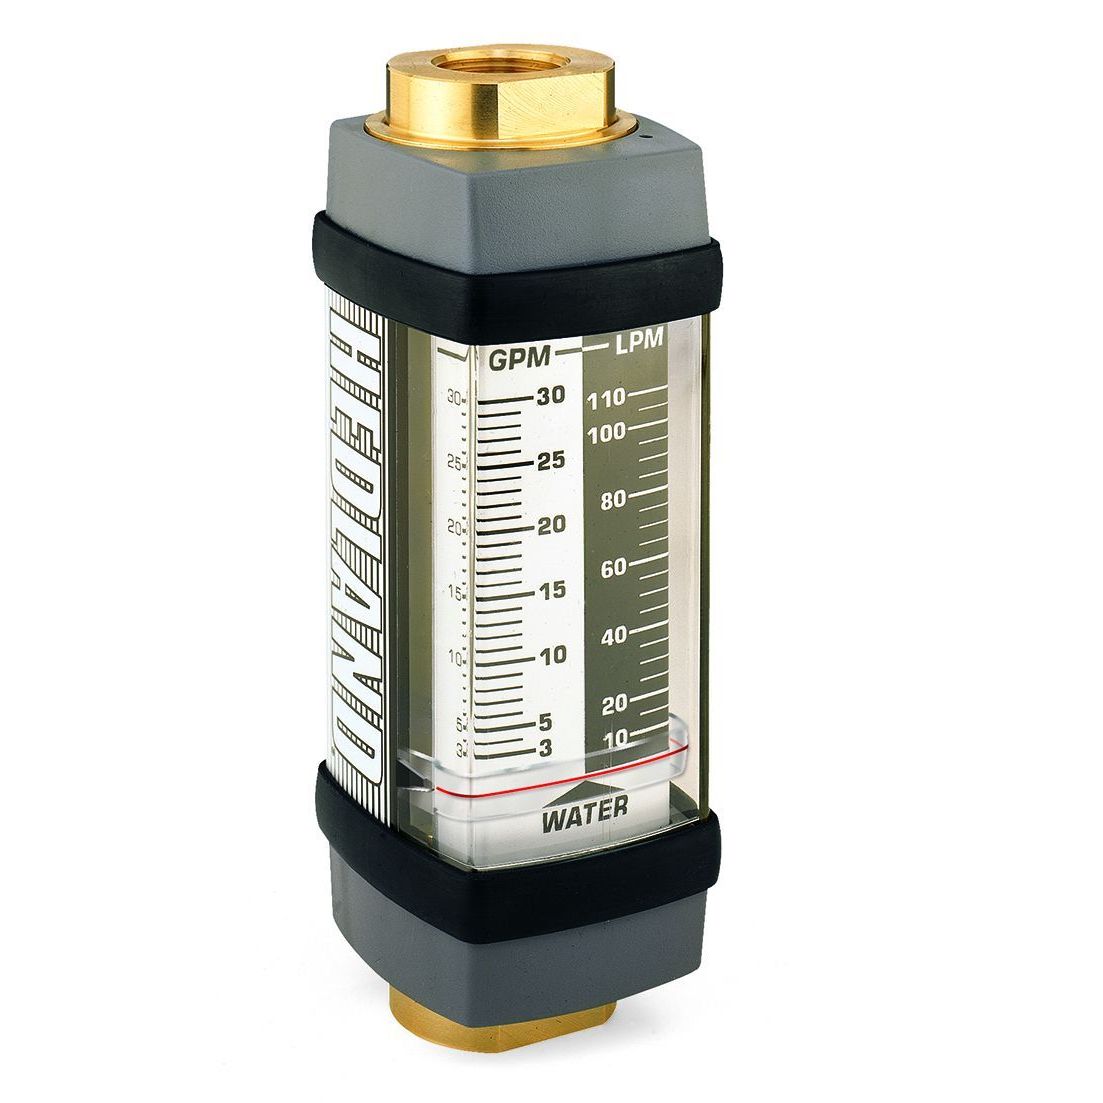 H604B-005 : Hedland 3500psi Brass Flow Meter for Water, #10 SAE (5/8), 0.5 to 5.0 GPM